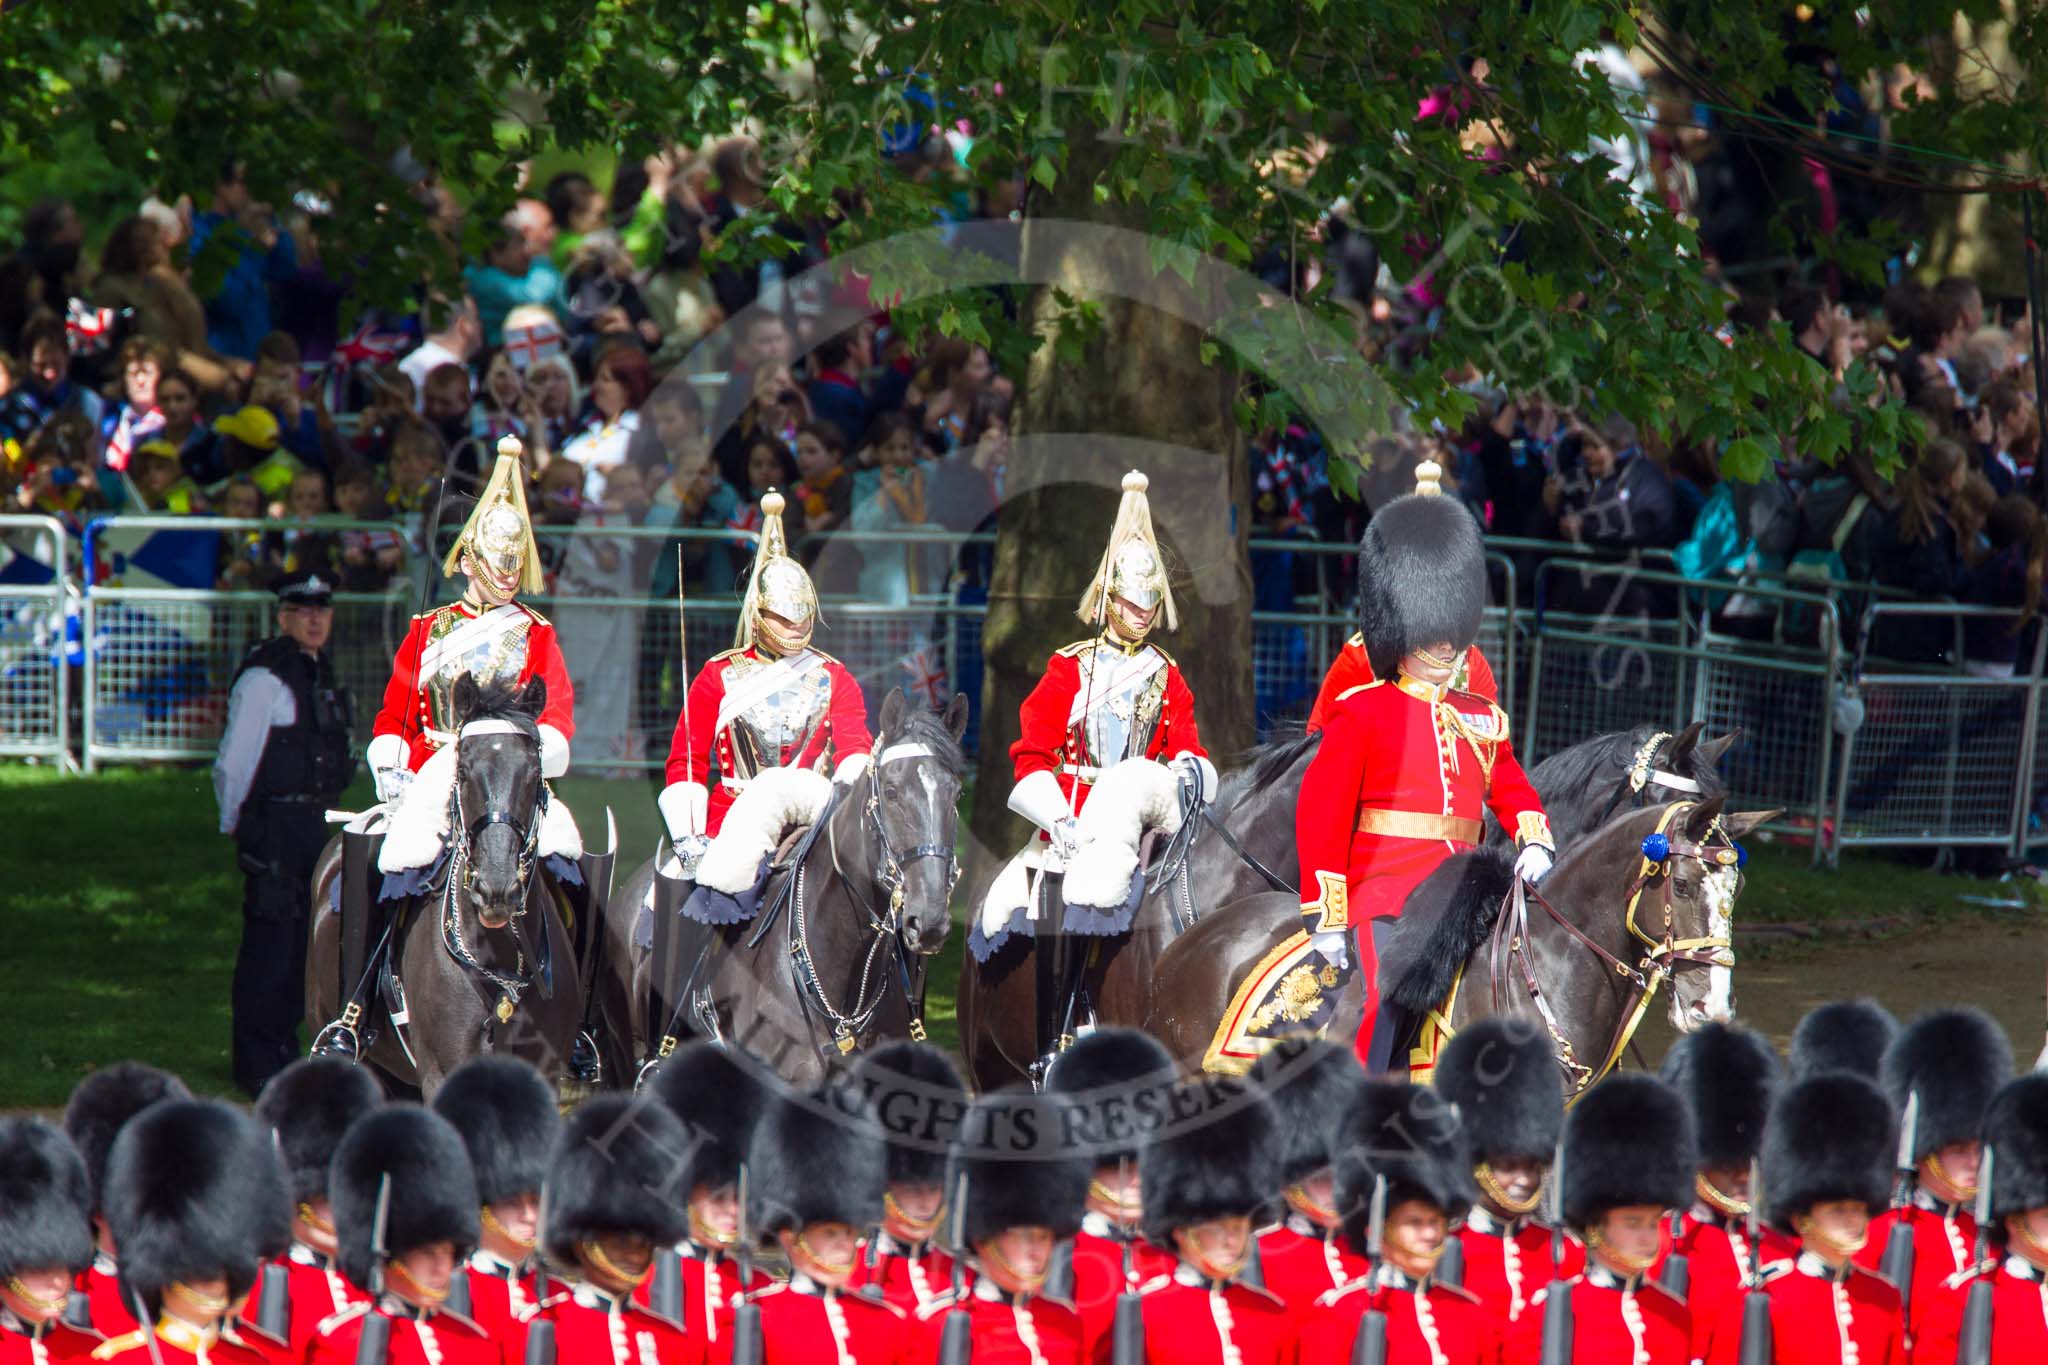 Trooping the Colour 2013: Brigade Major Household Division Lieutenant Colonel Simon Soskin, Grenadier Guards, followed by four Troopers of The Life Guards, leading the Royal Procession onto Horse Guards Parade. Image #230, 15 June 2013 10:56 Horse Guards Parade, London, UK